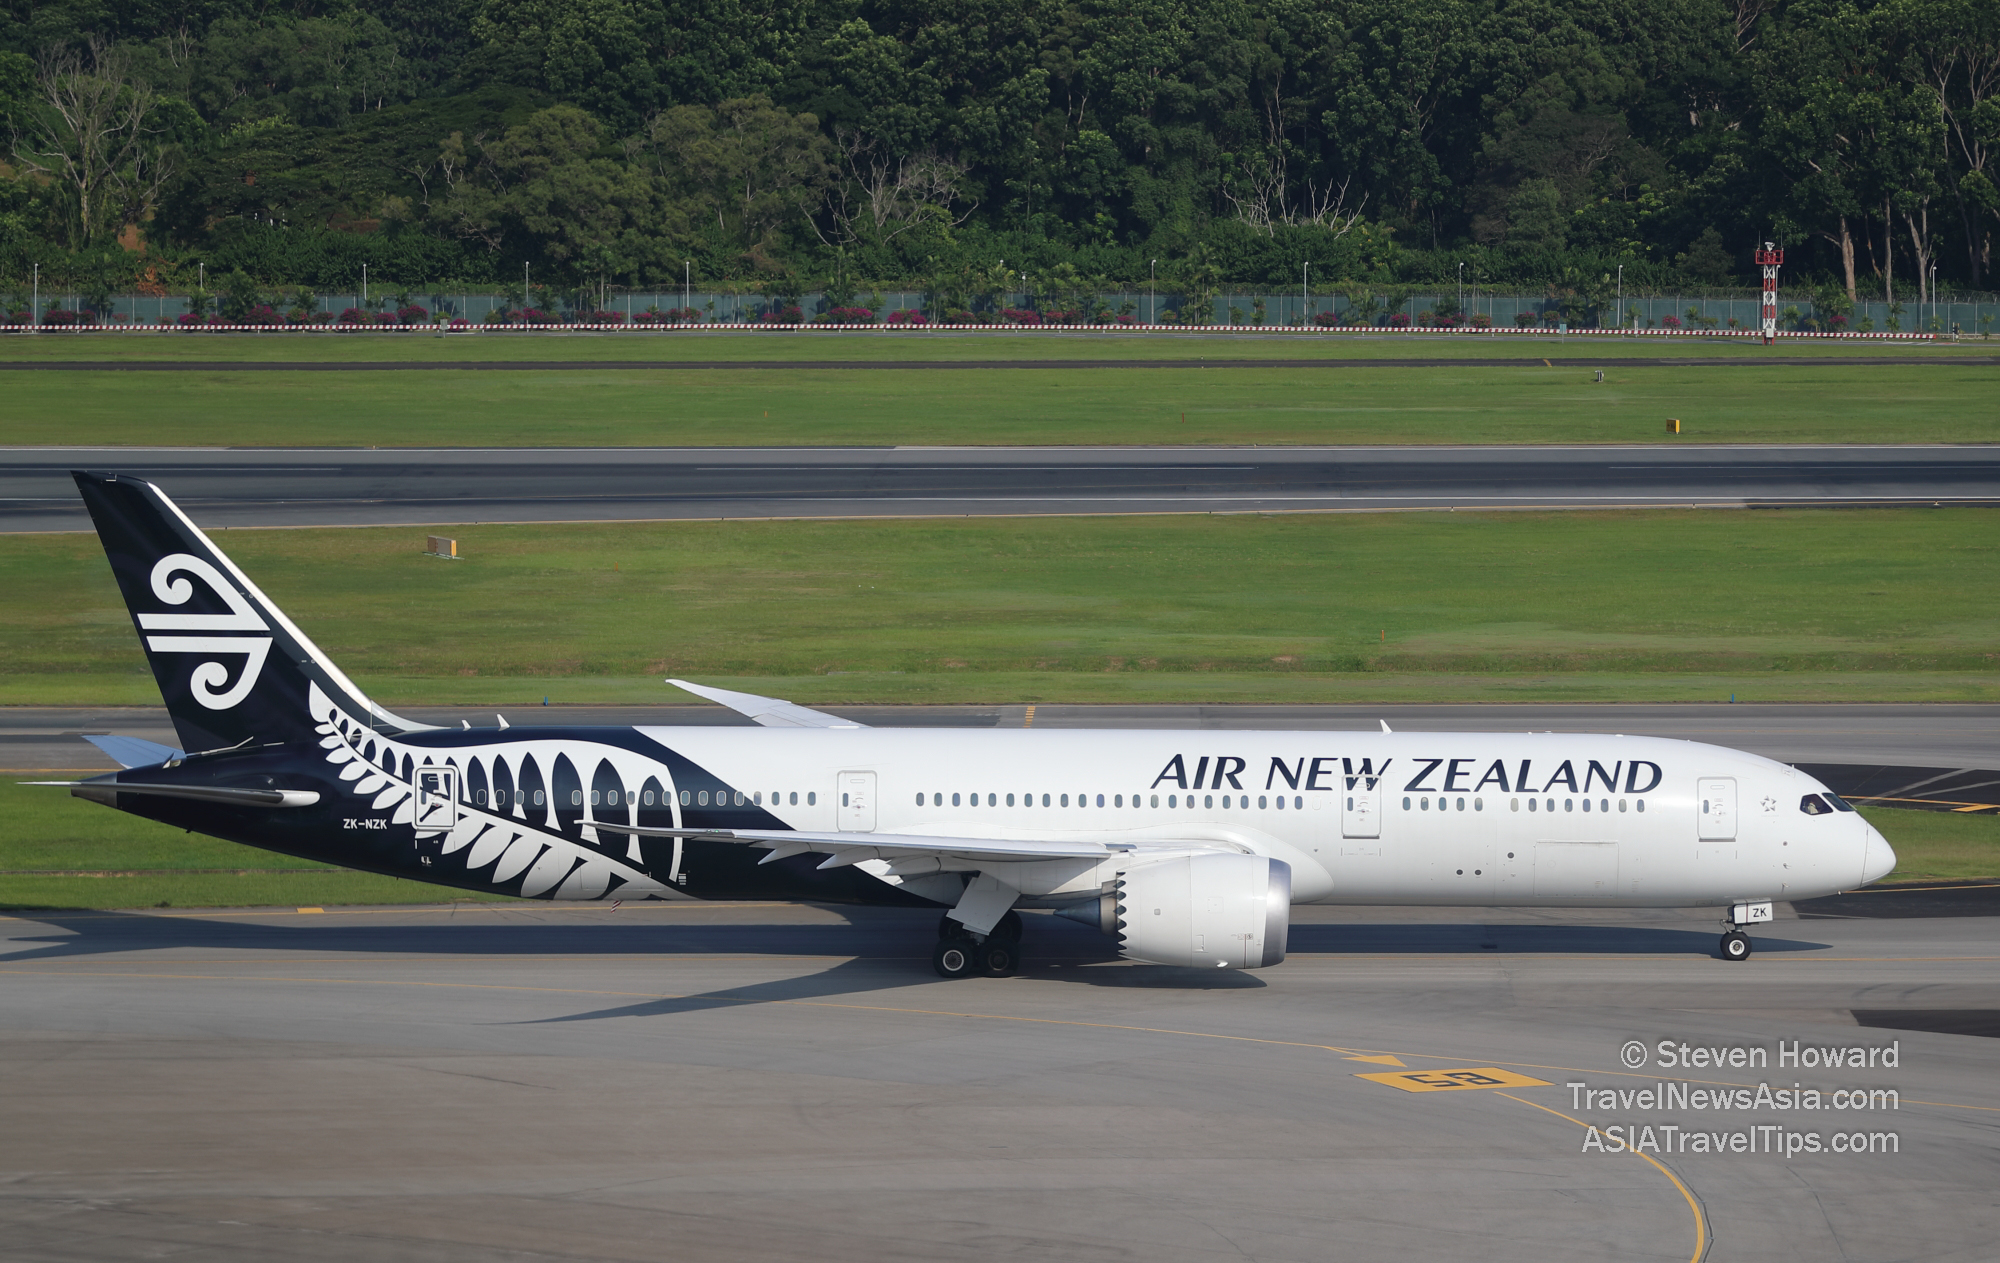 Air New Zealand Boeing 787-9 Dreamliner reg: ZK-NZK at Changi Airport in Singapore. Picture by Steven Howard of TravelNewsAsia.com Click to enlarge.